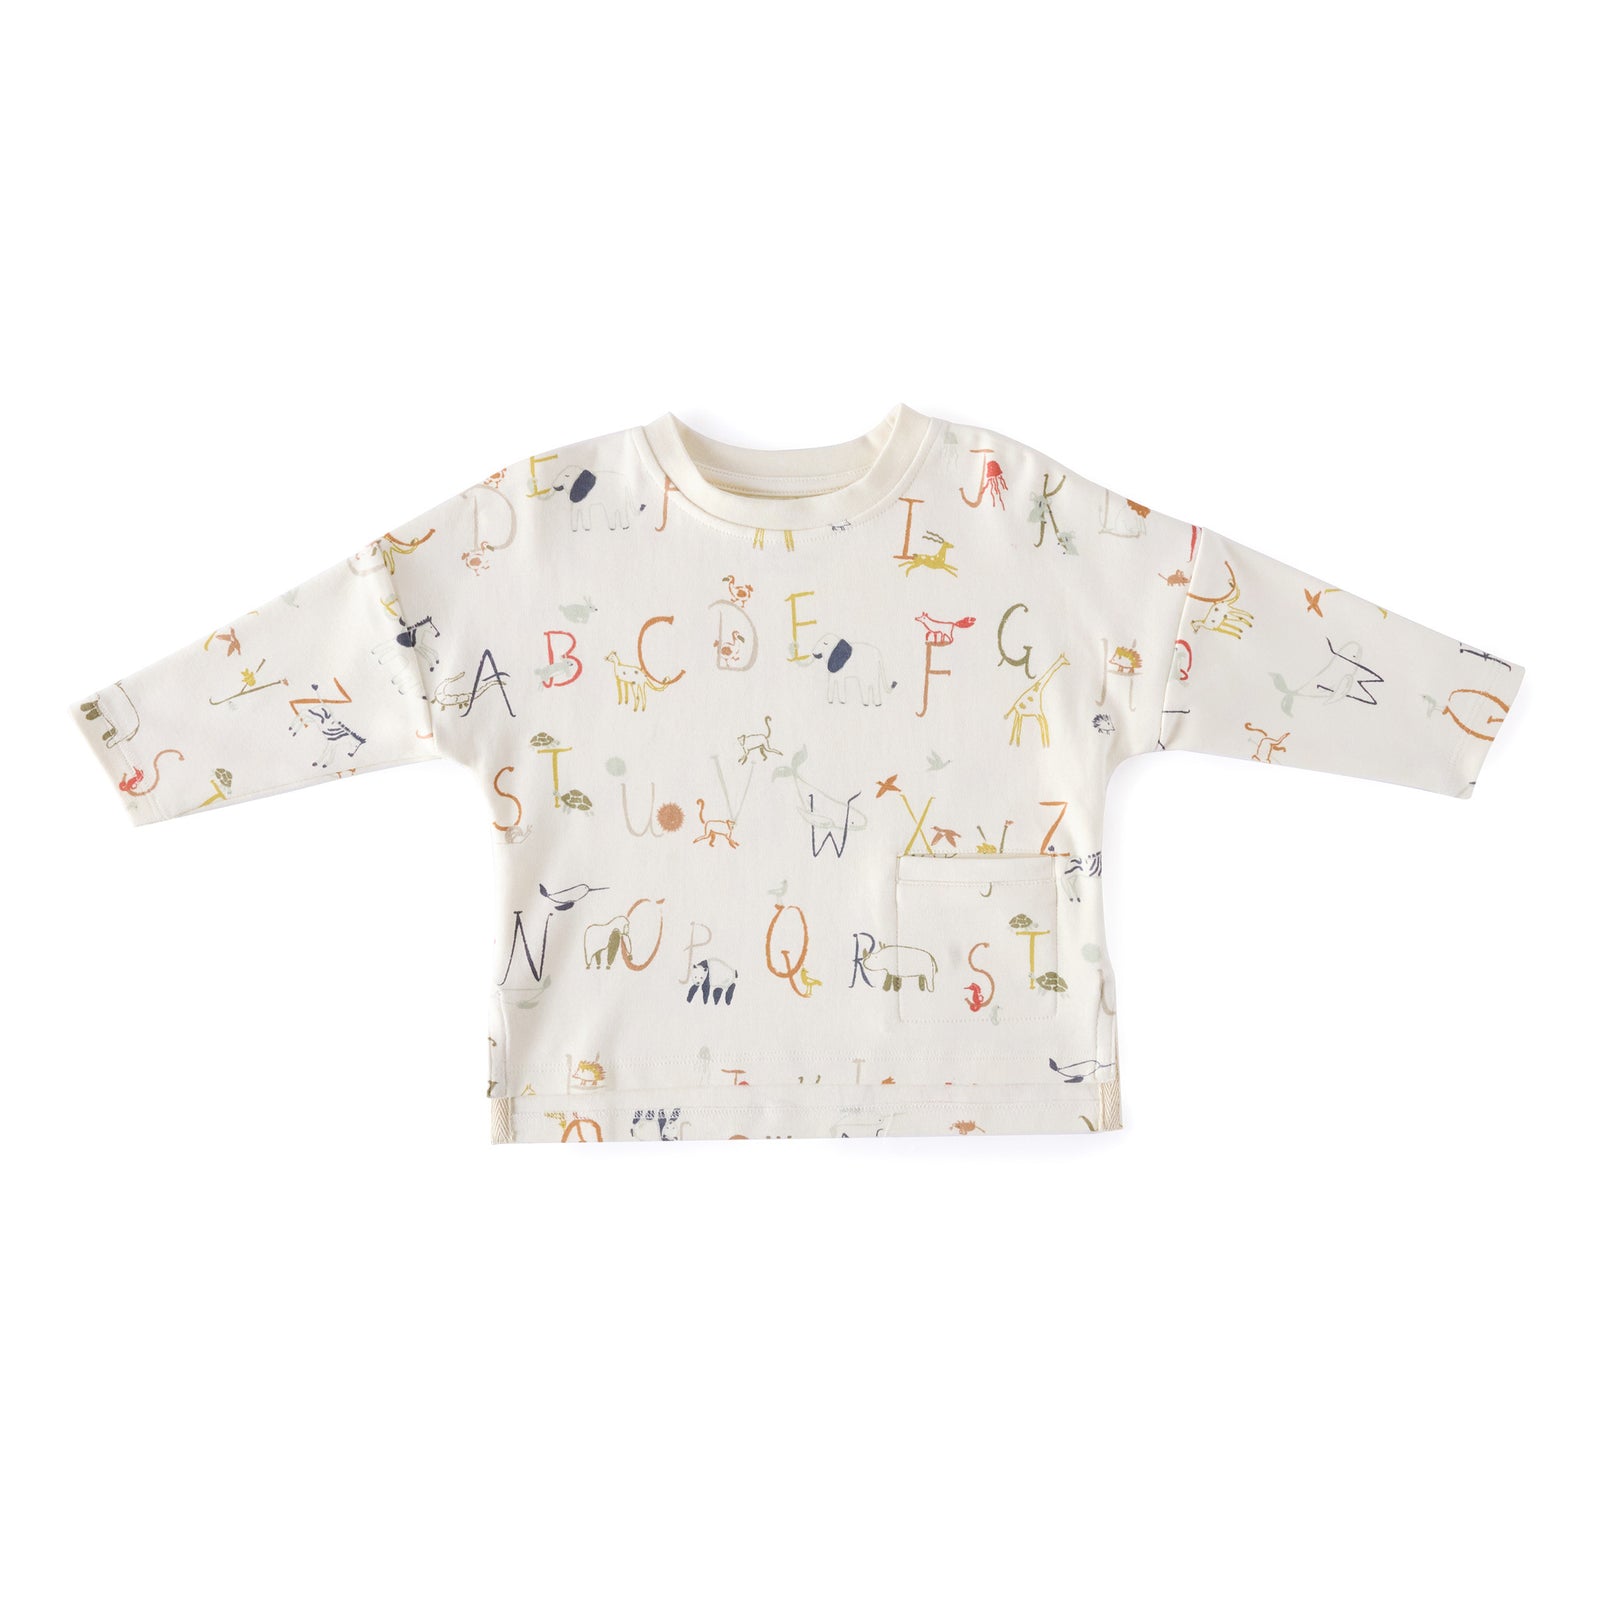 Long Sleeve Top Top Pehr A to Zoo 18 - 24 mos. 